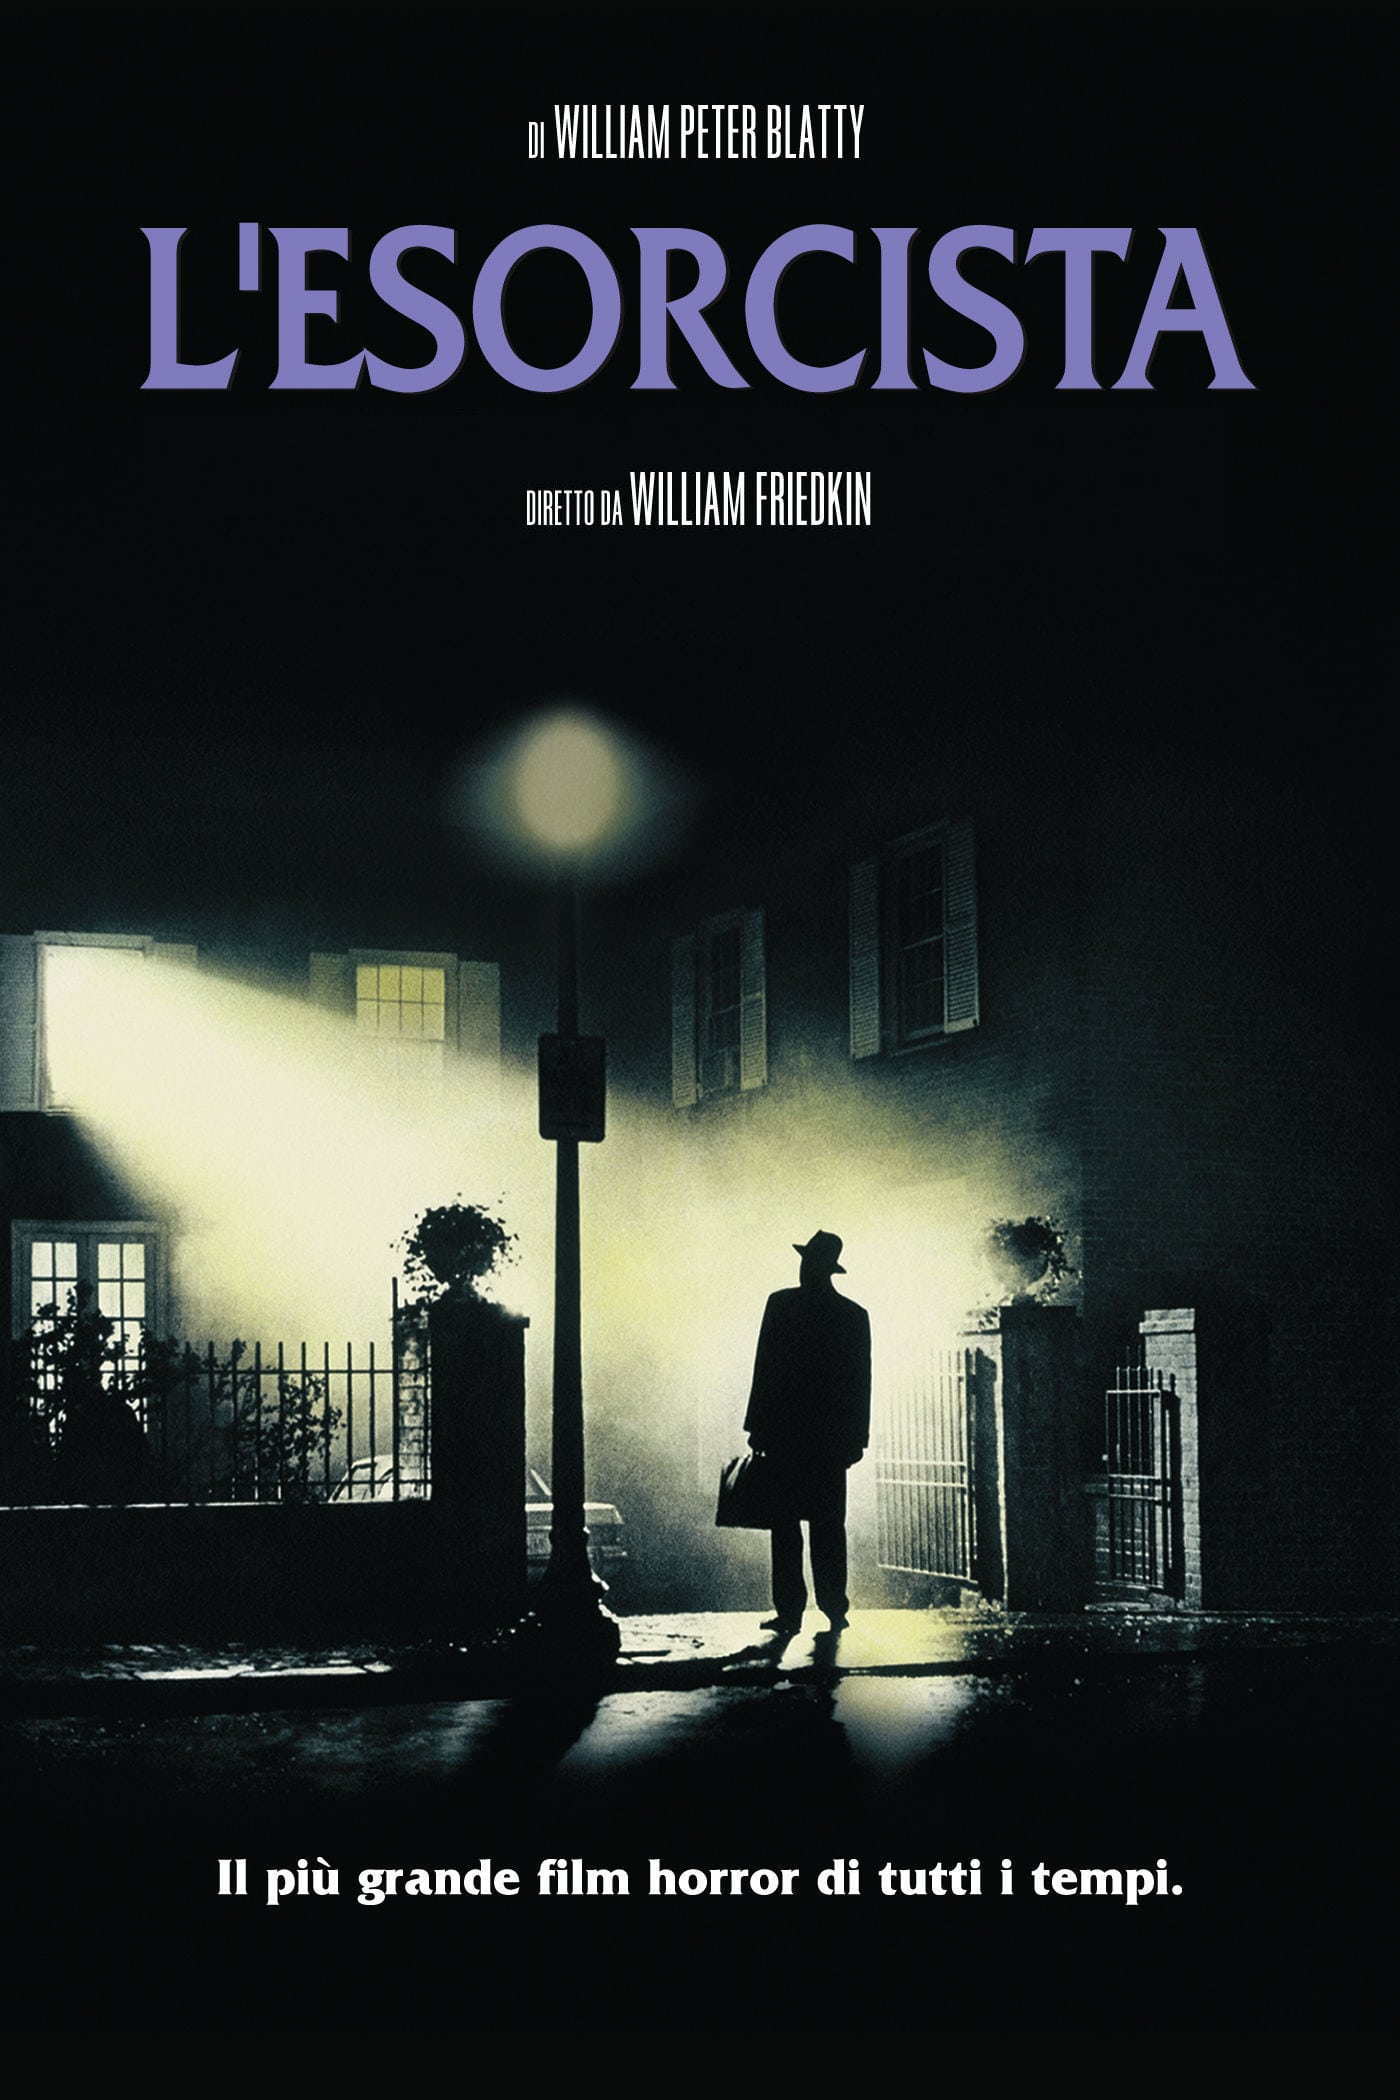 Poster for the movie "L'esorcista"